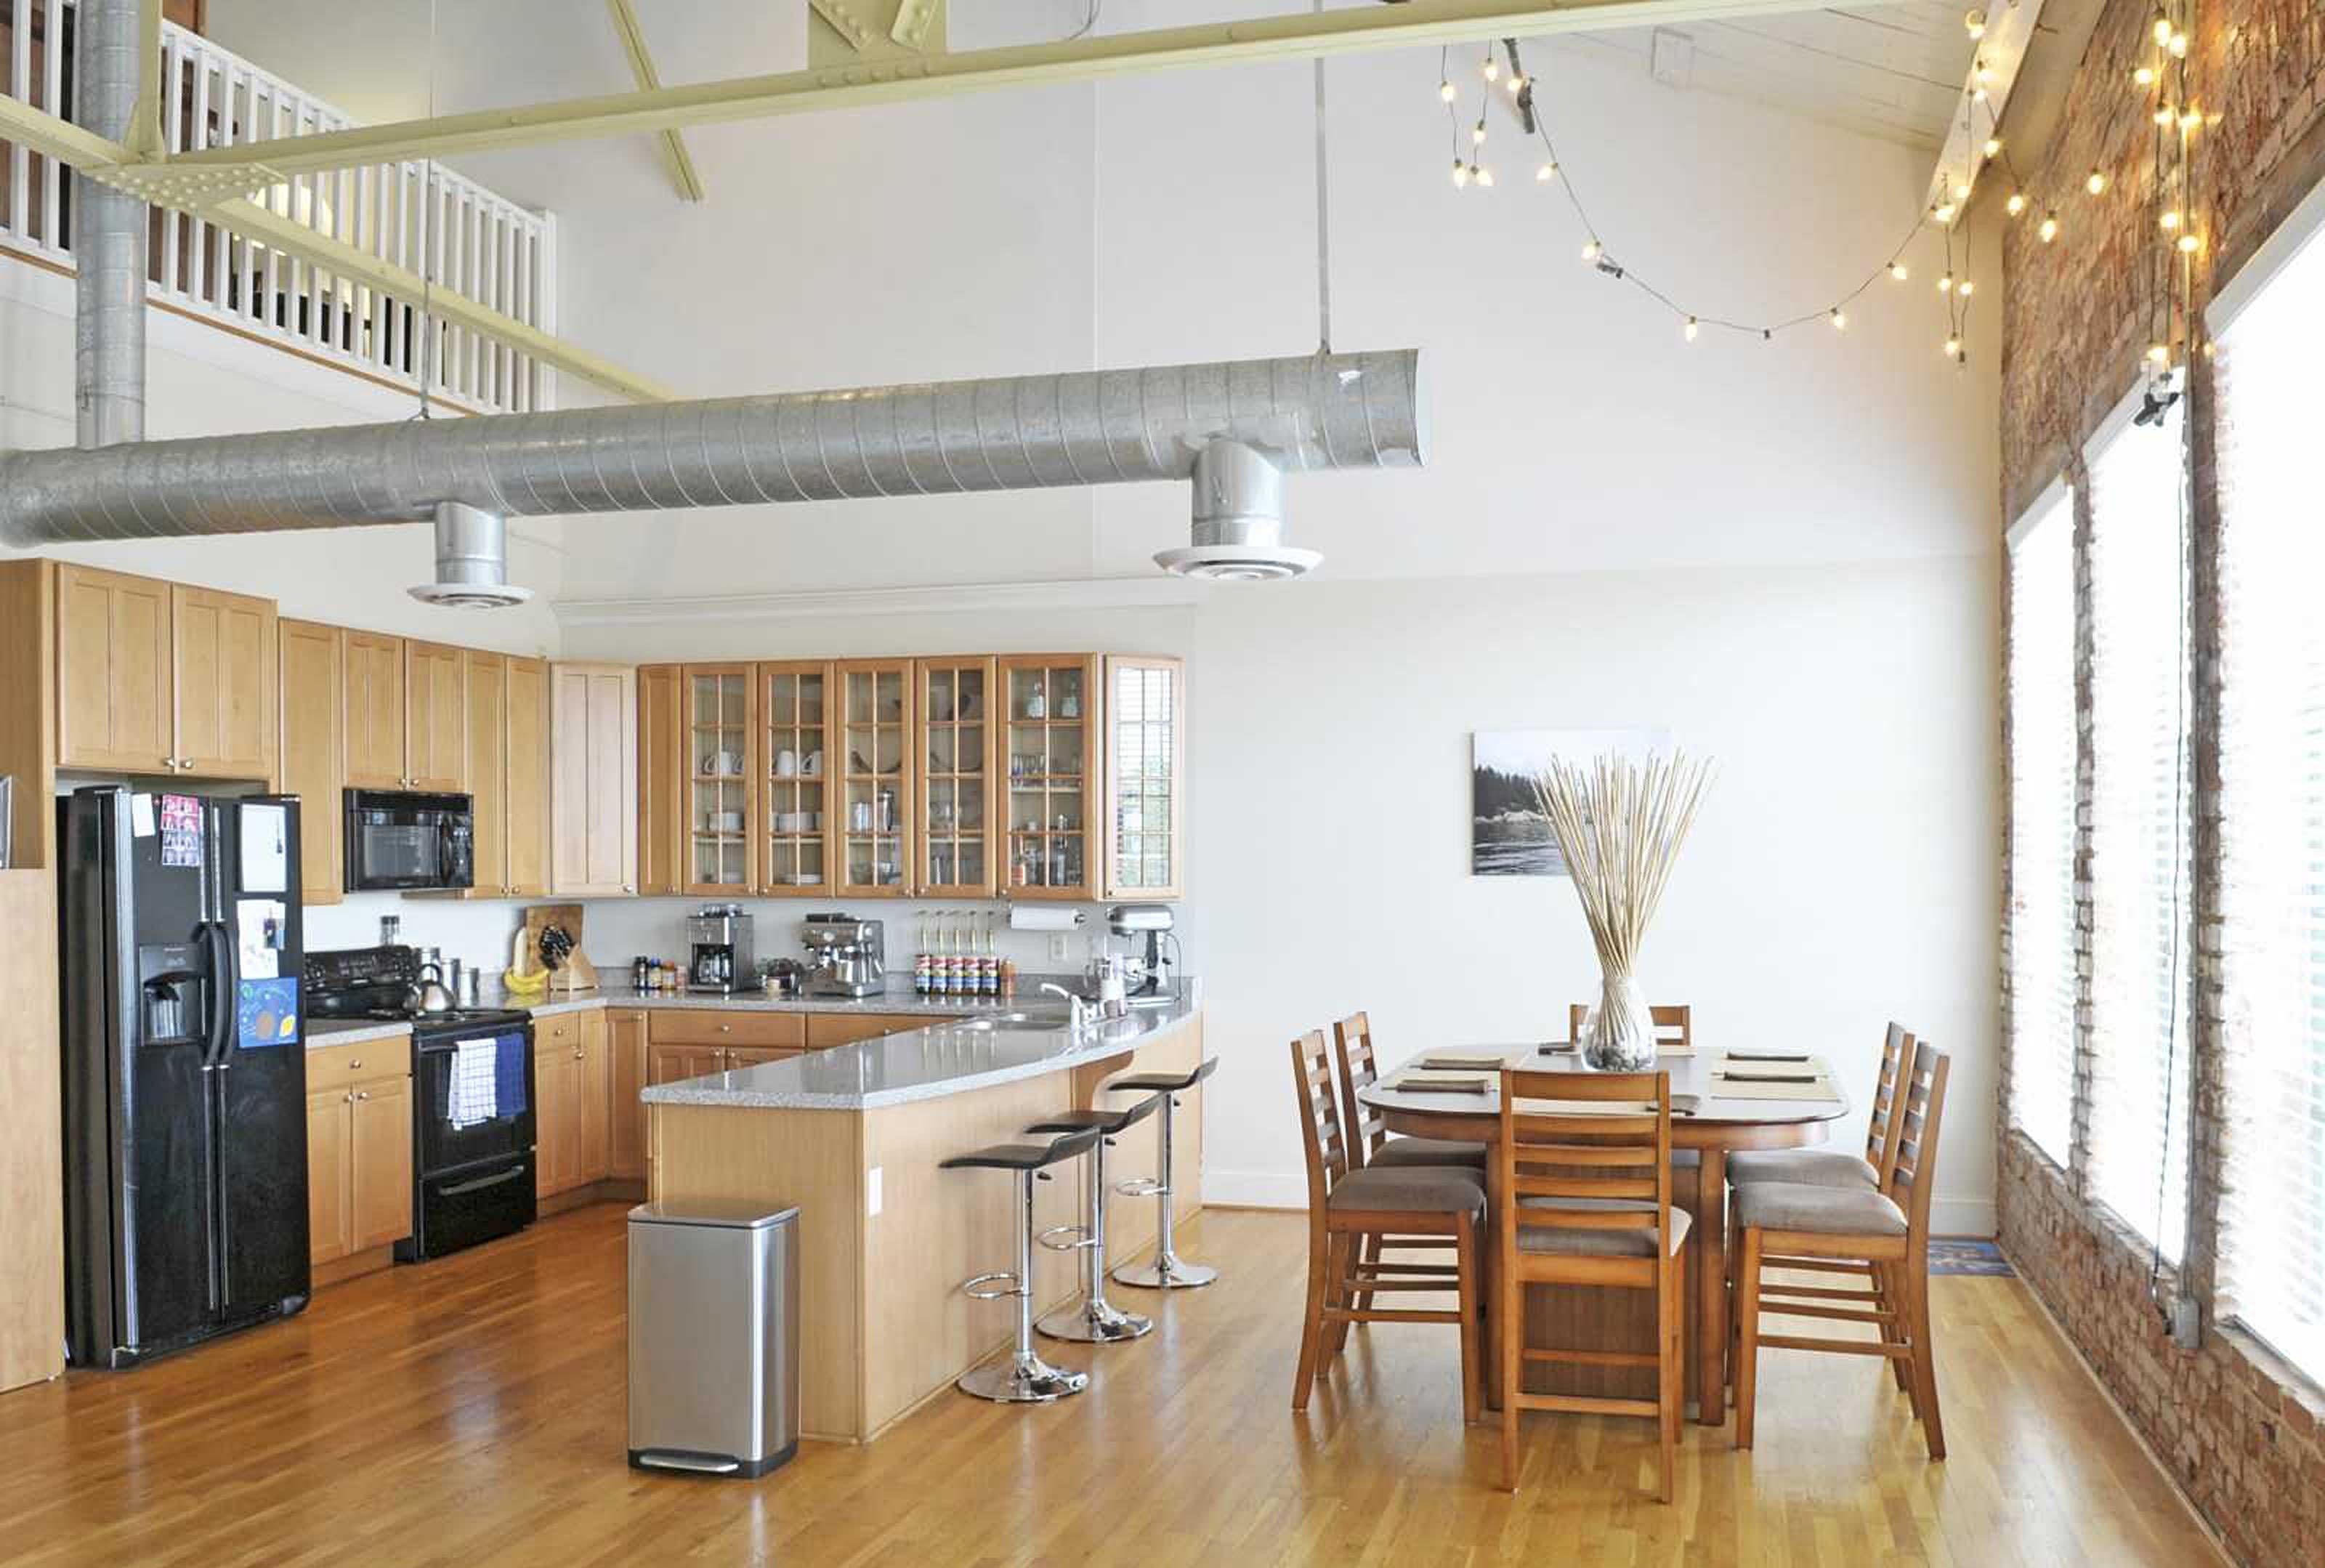 Kitchen with industrial style design at Broadway Lofts in Macon, Georgia